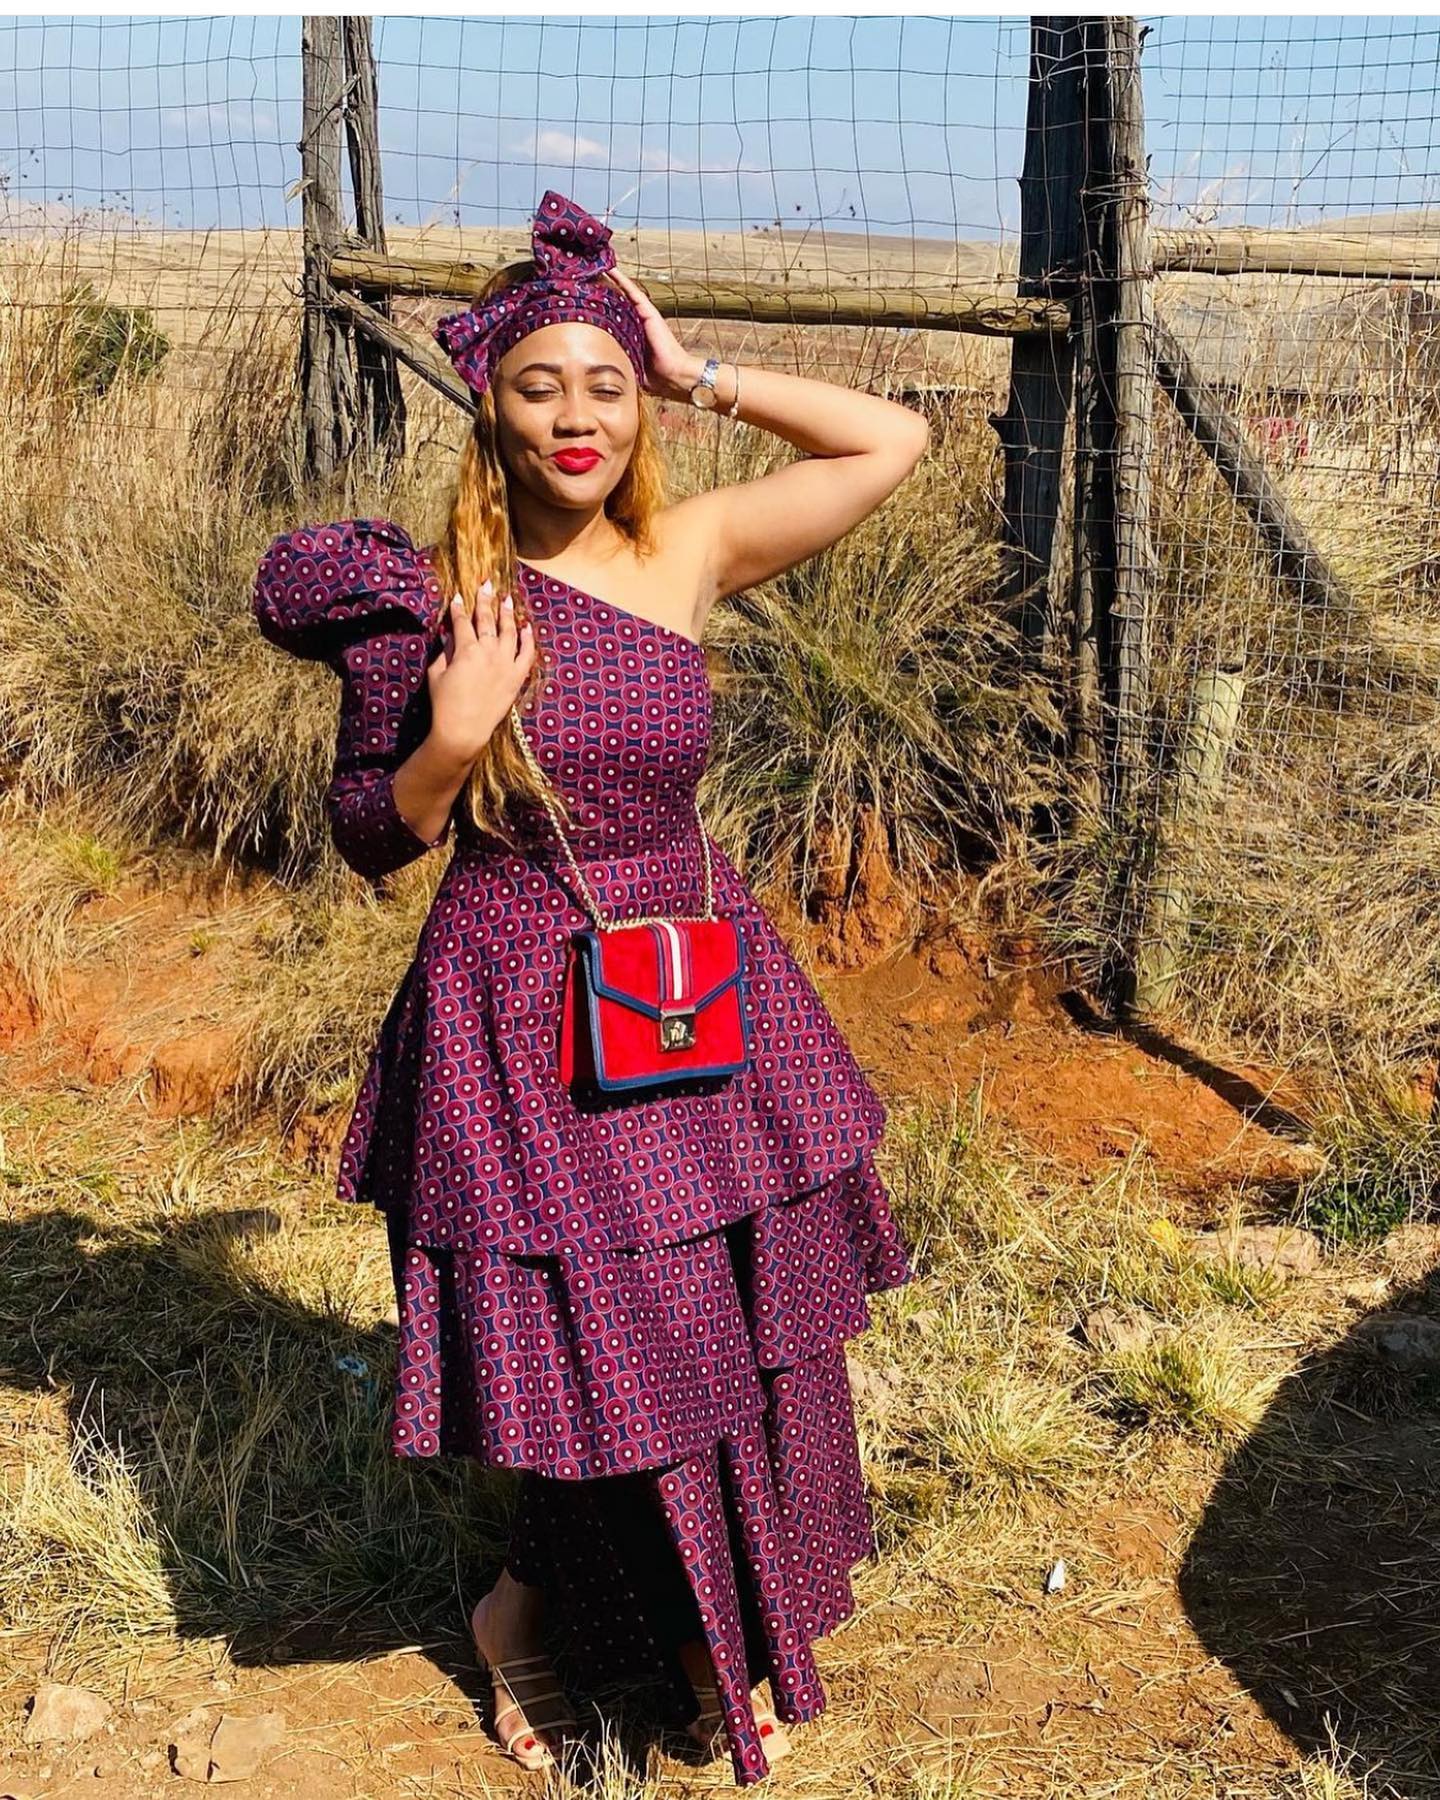 Tswana Traditional Dresses: Exploring the Artistic Techniques and Materials Used 22